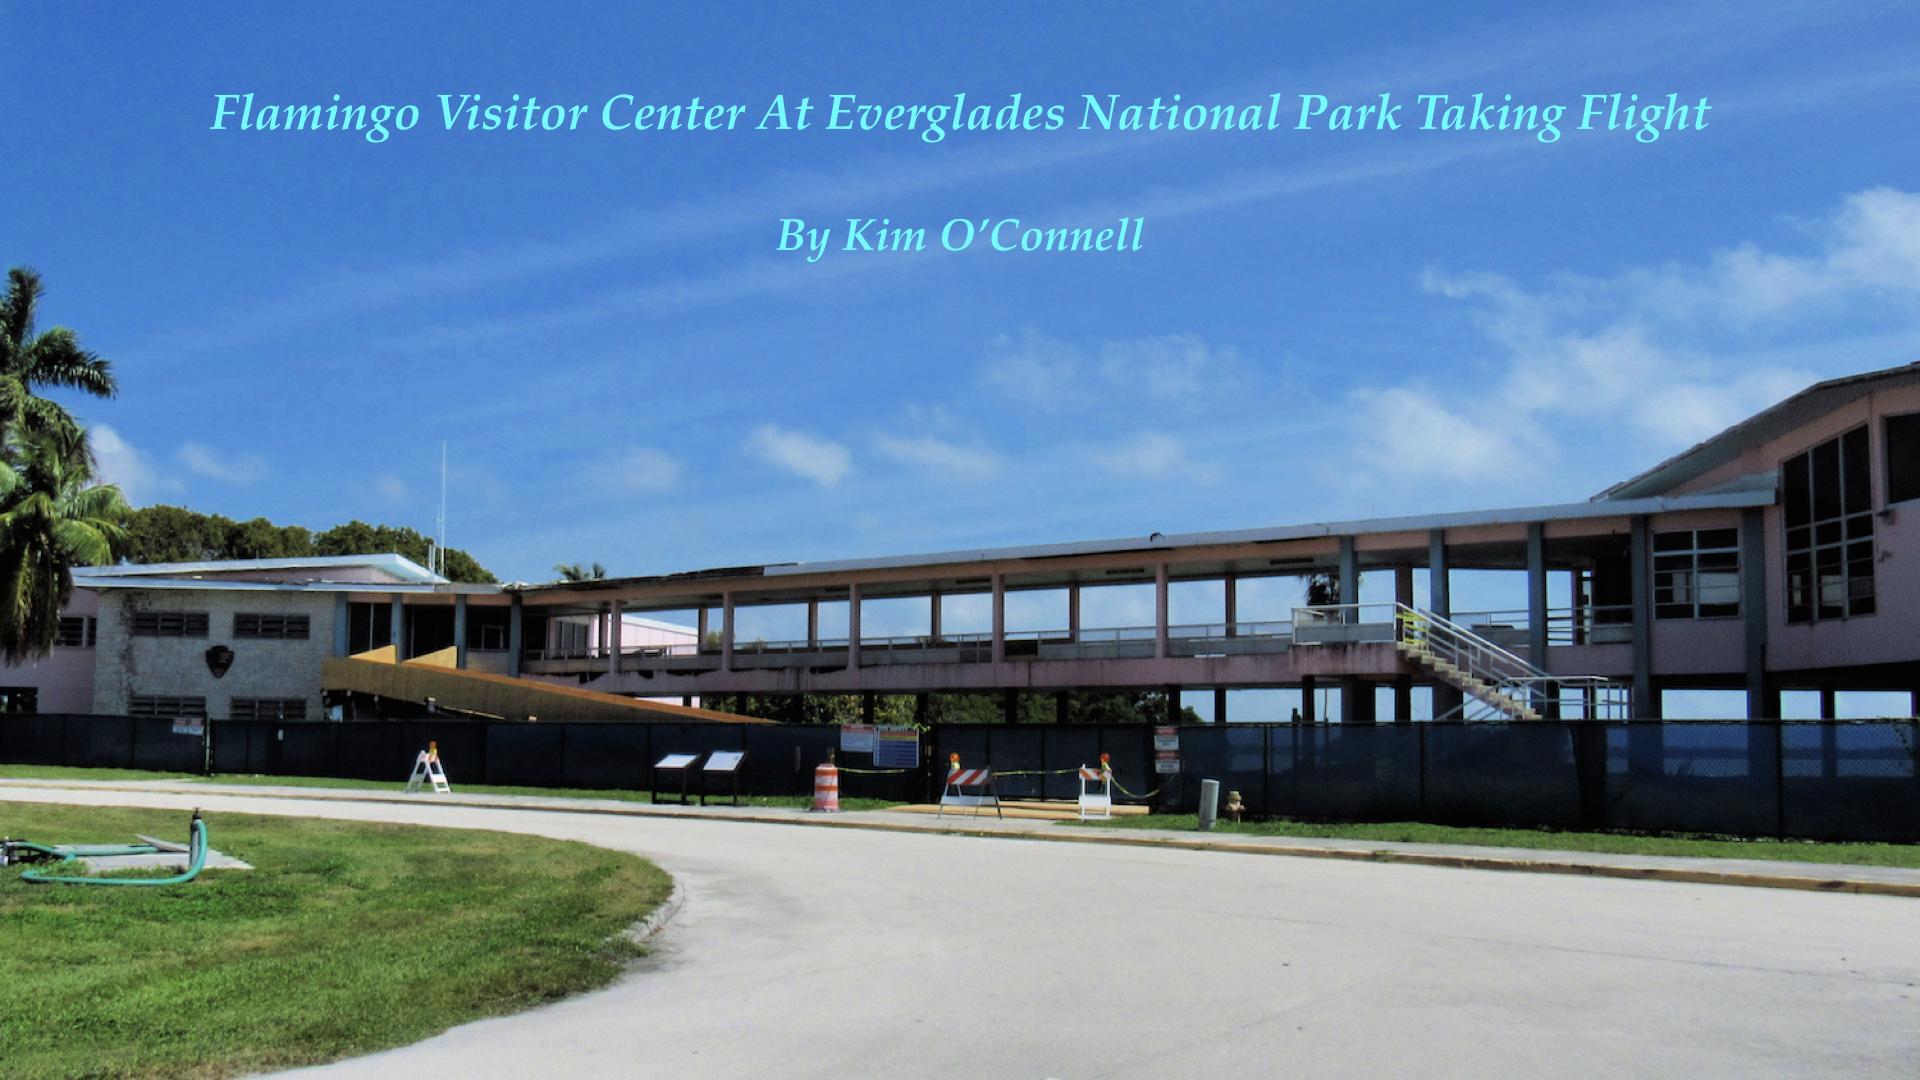 Flamingo Visitor Center at Everglades National Park is undergoing a revitalization/Kim O'Connell